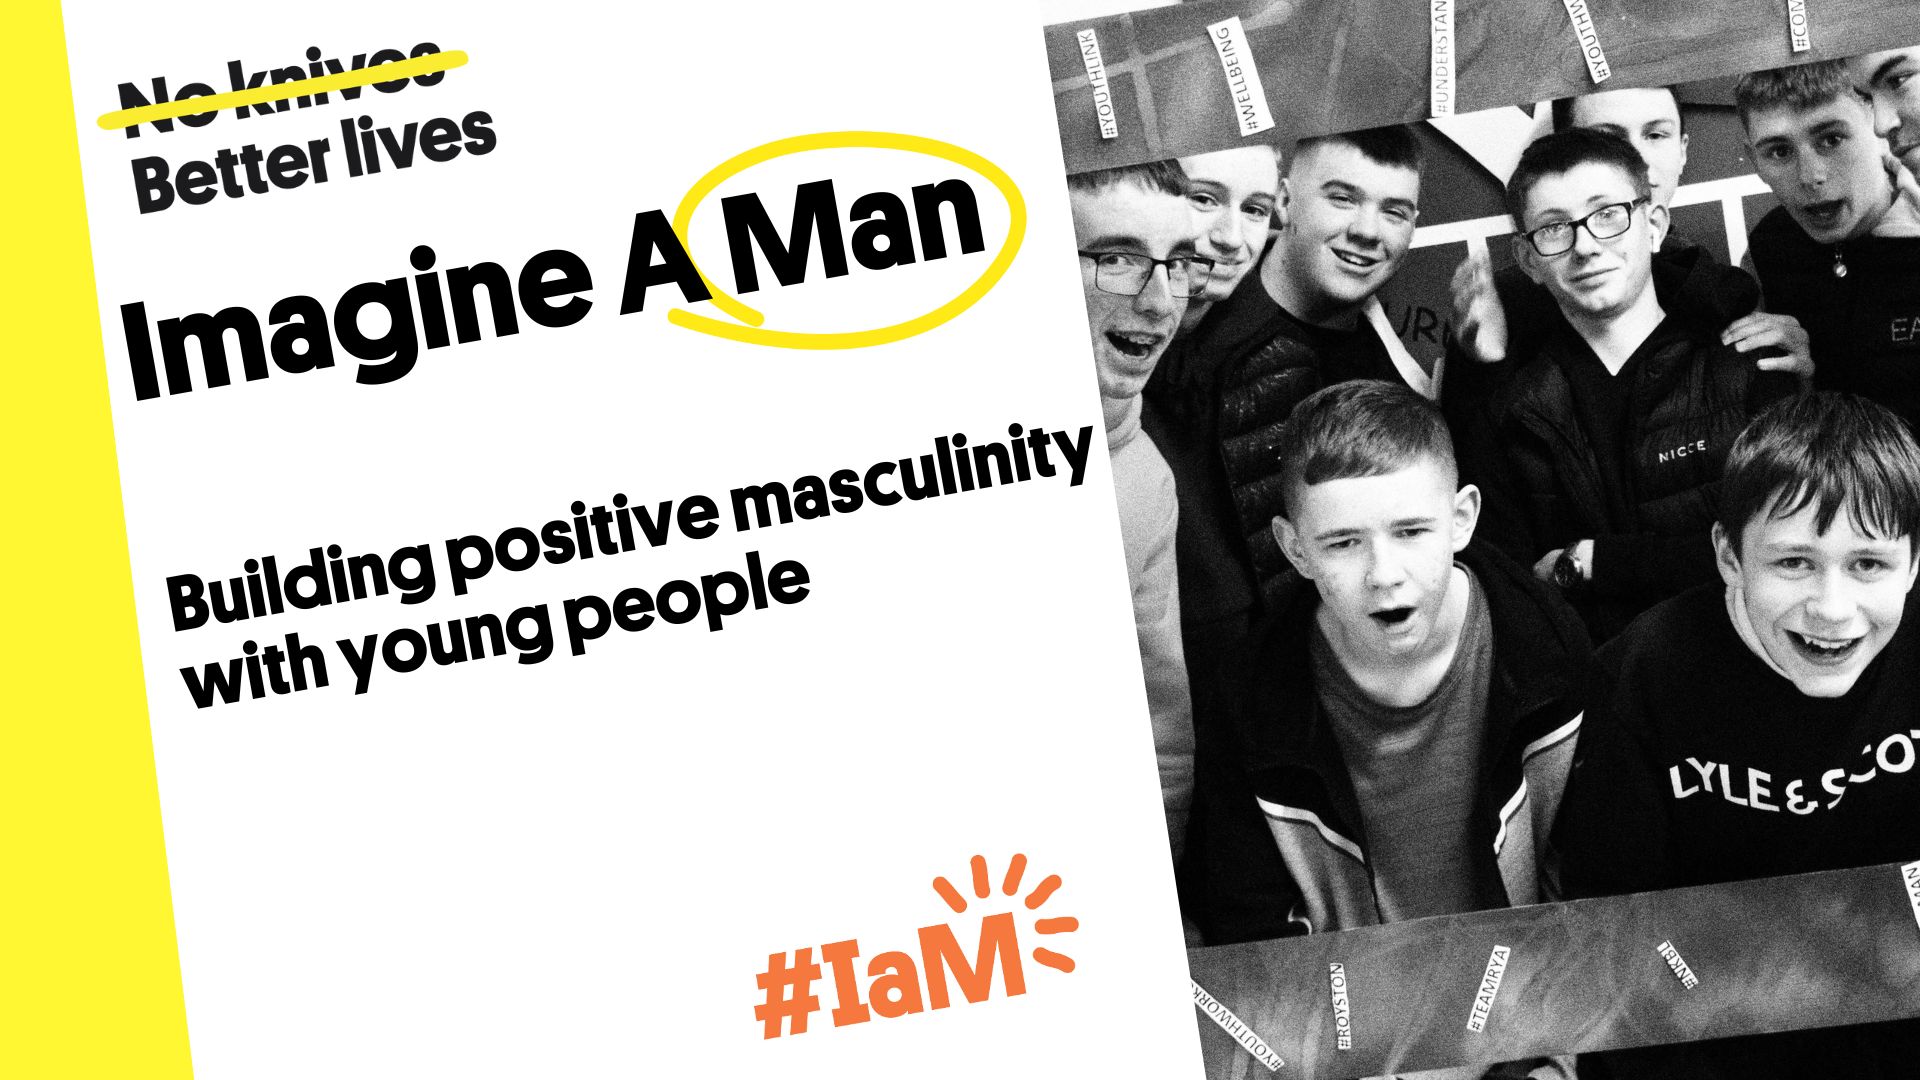 Imagine a Man - Building positive masculinity with young people